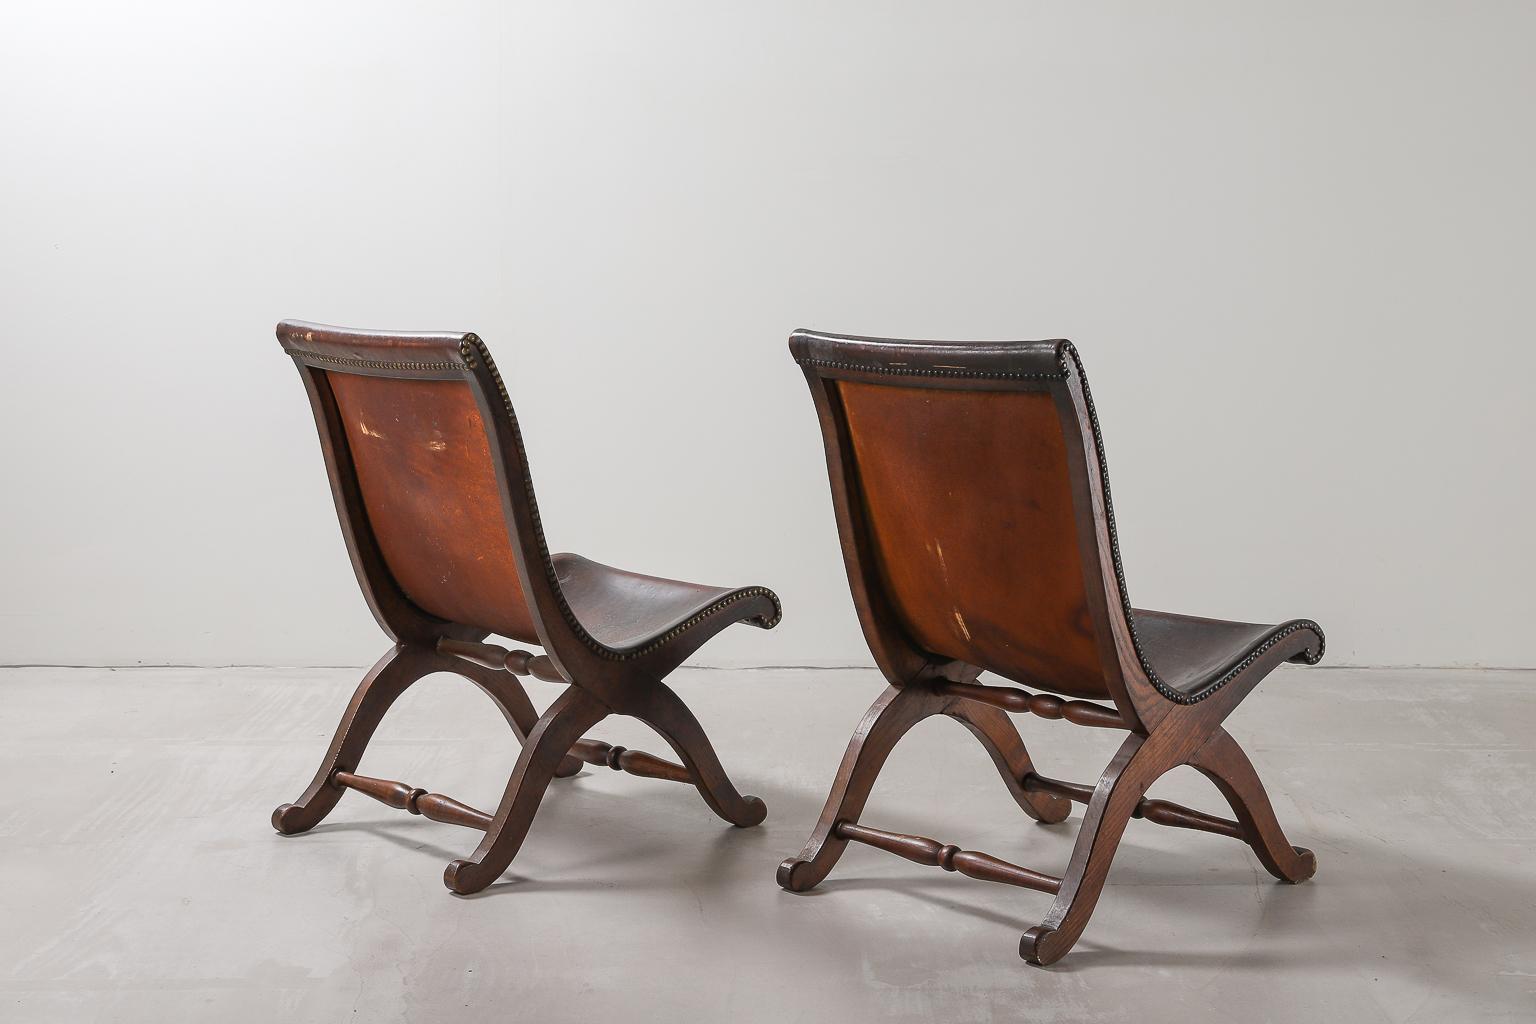 Brass Pair of Spanish Leather Armchairs by Pierre Lottier for Valenti, 1940s